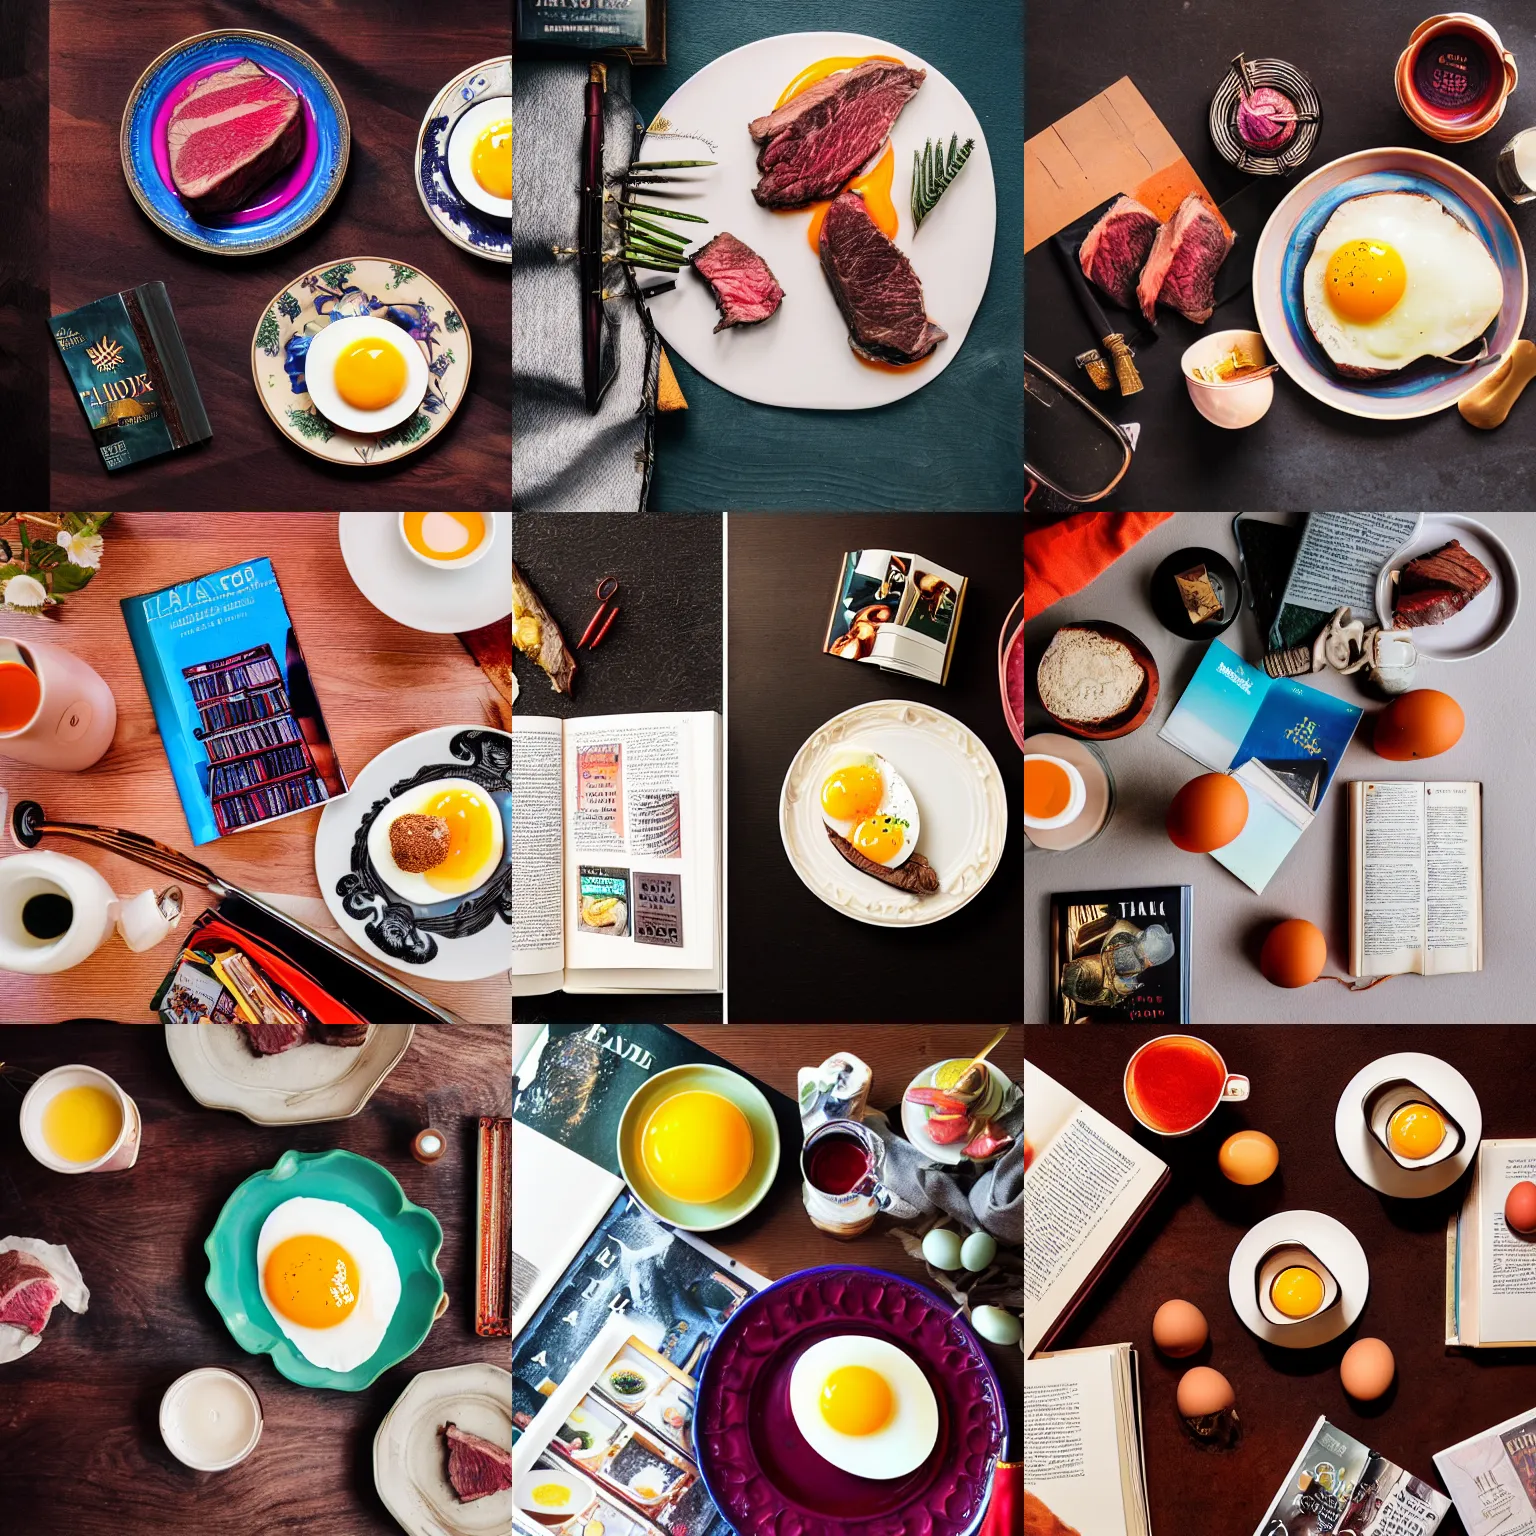 Prompt: flatlay book collection, vivid colors, dramatic lighting, a plate of steak and eggs